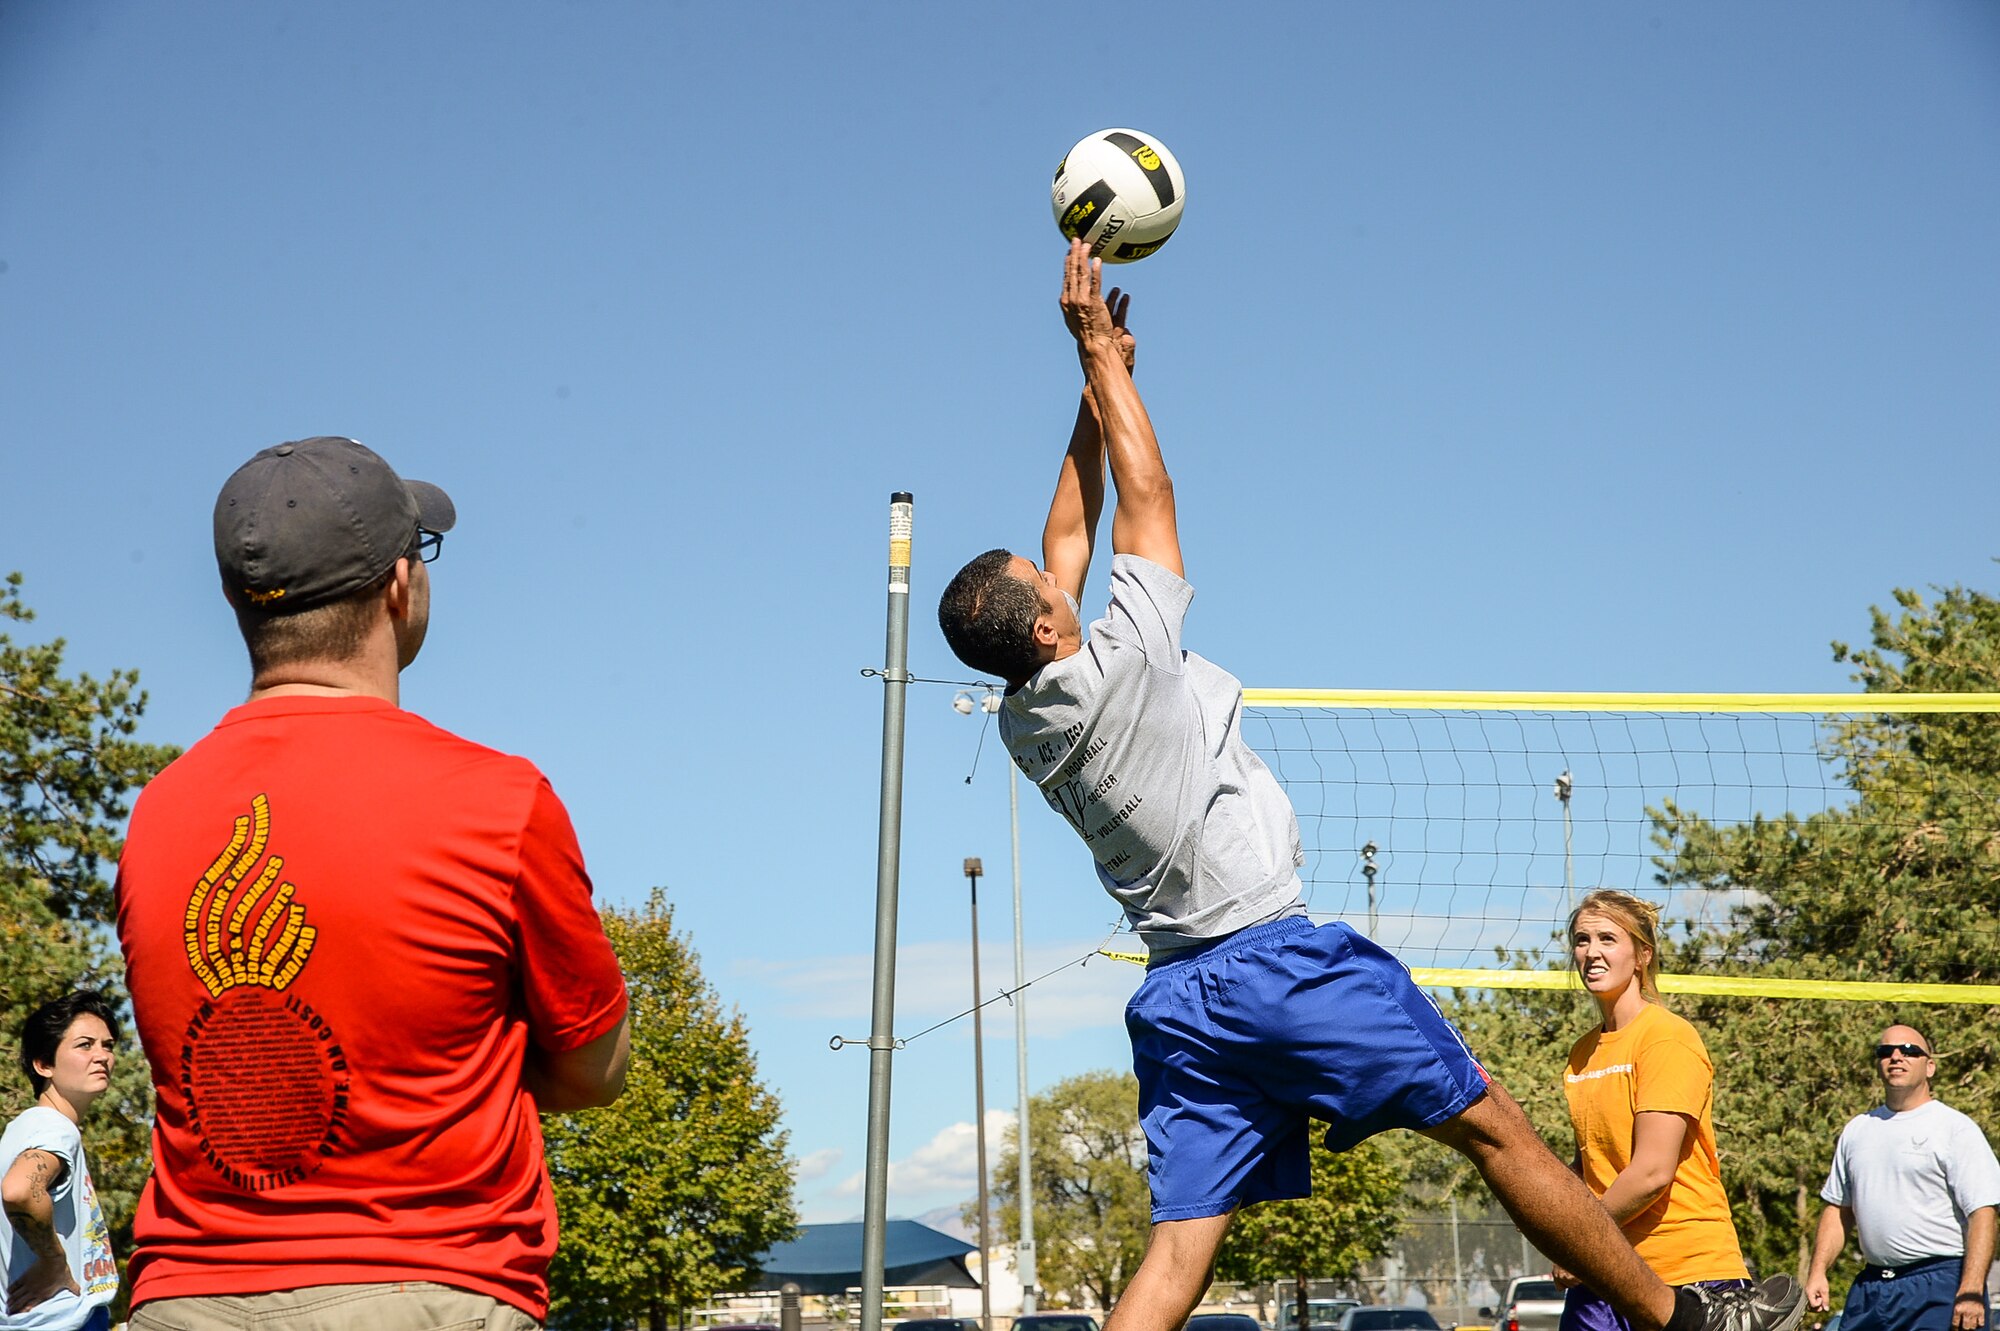 Team Hill personnel participate in a volleyball tournament during Wingman Day Sept. 30 at Hill Air Force Base. (U.S. Air Force by R. Nial Bradshaw)